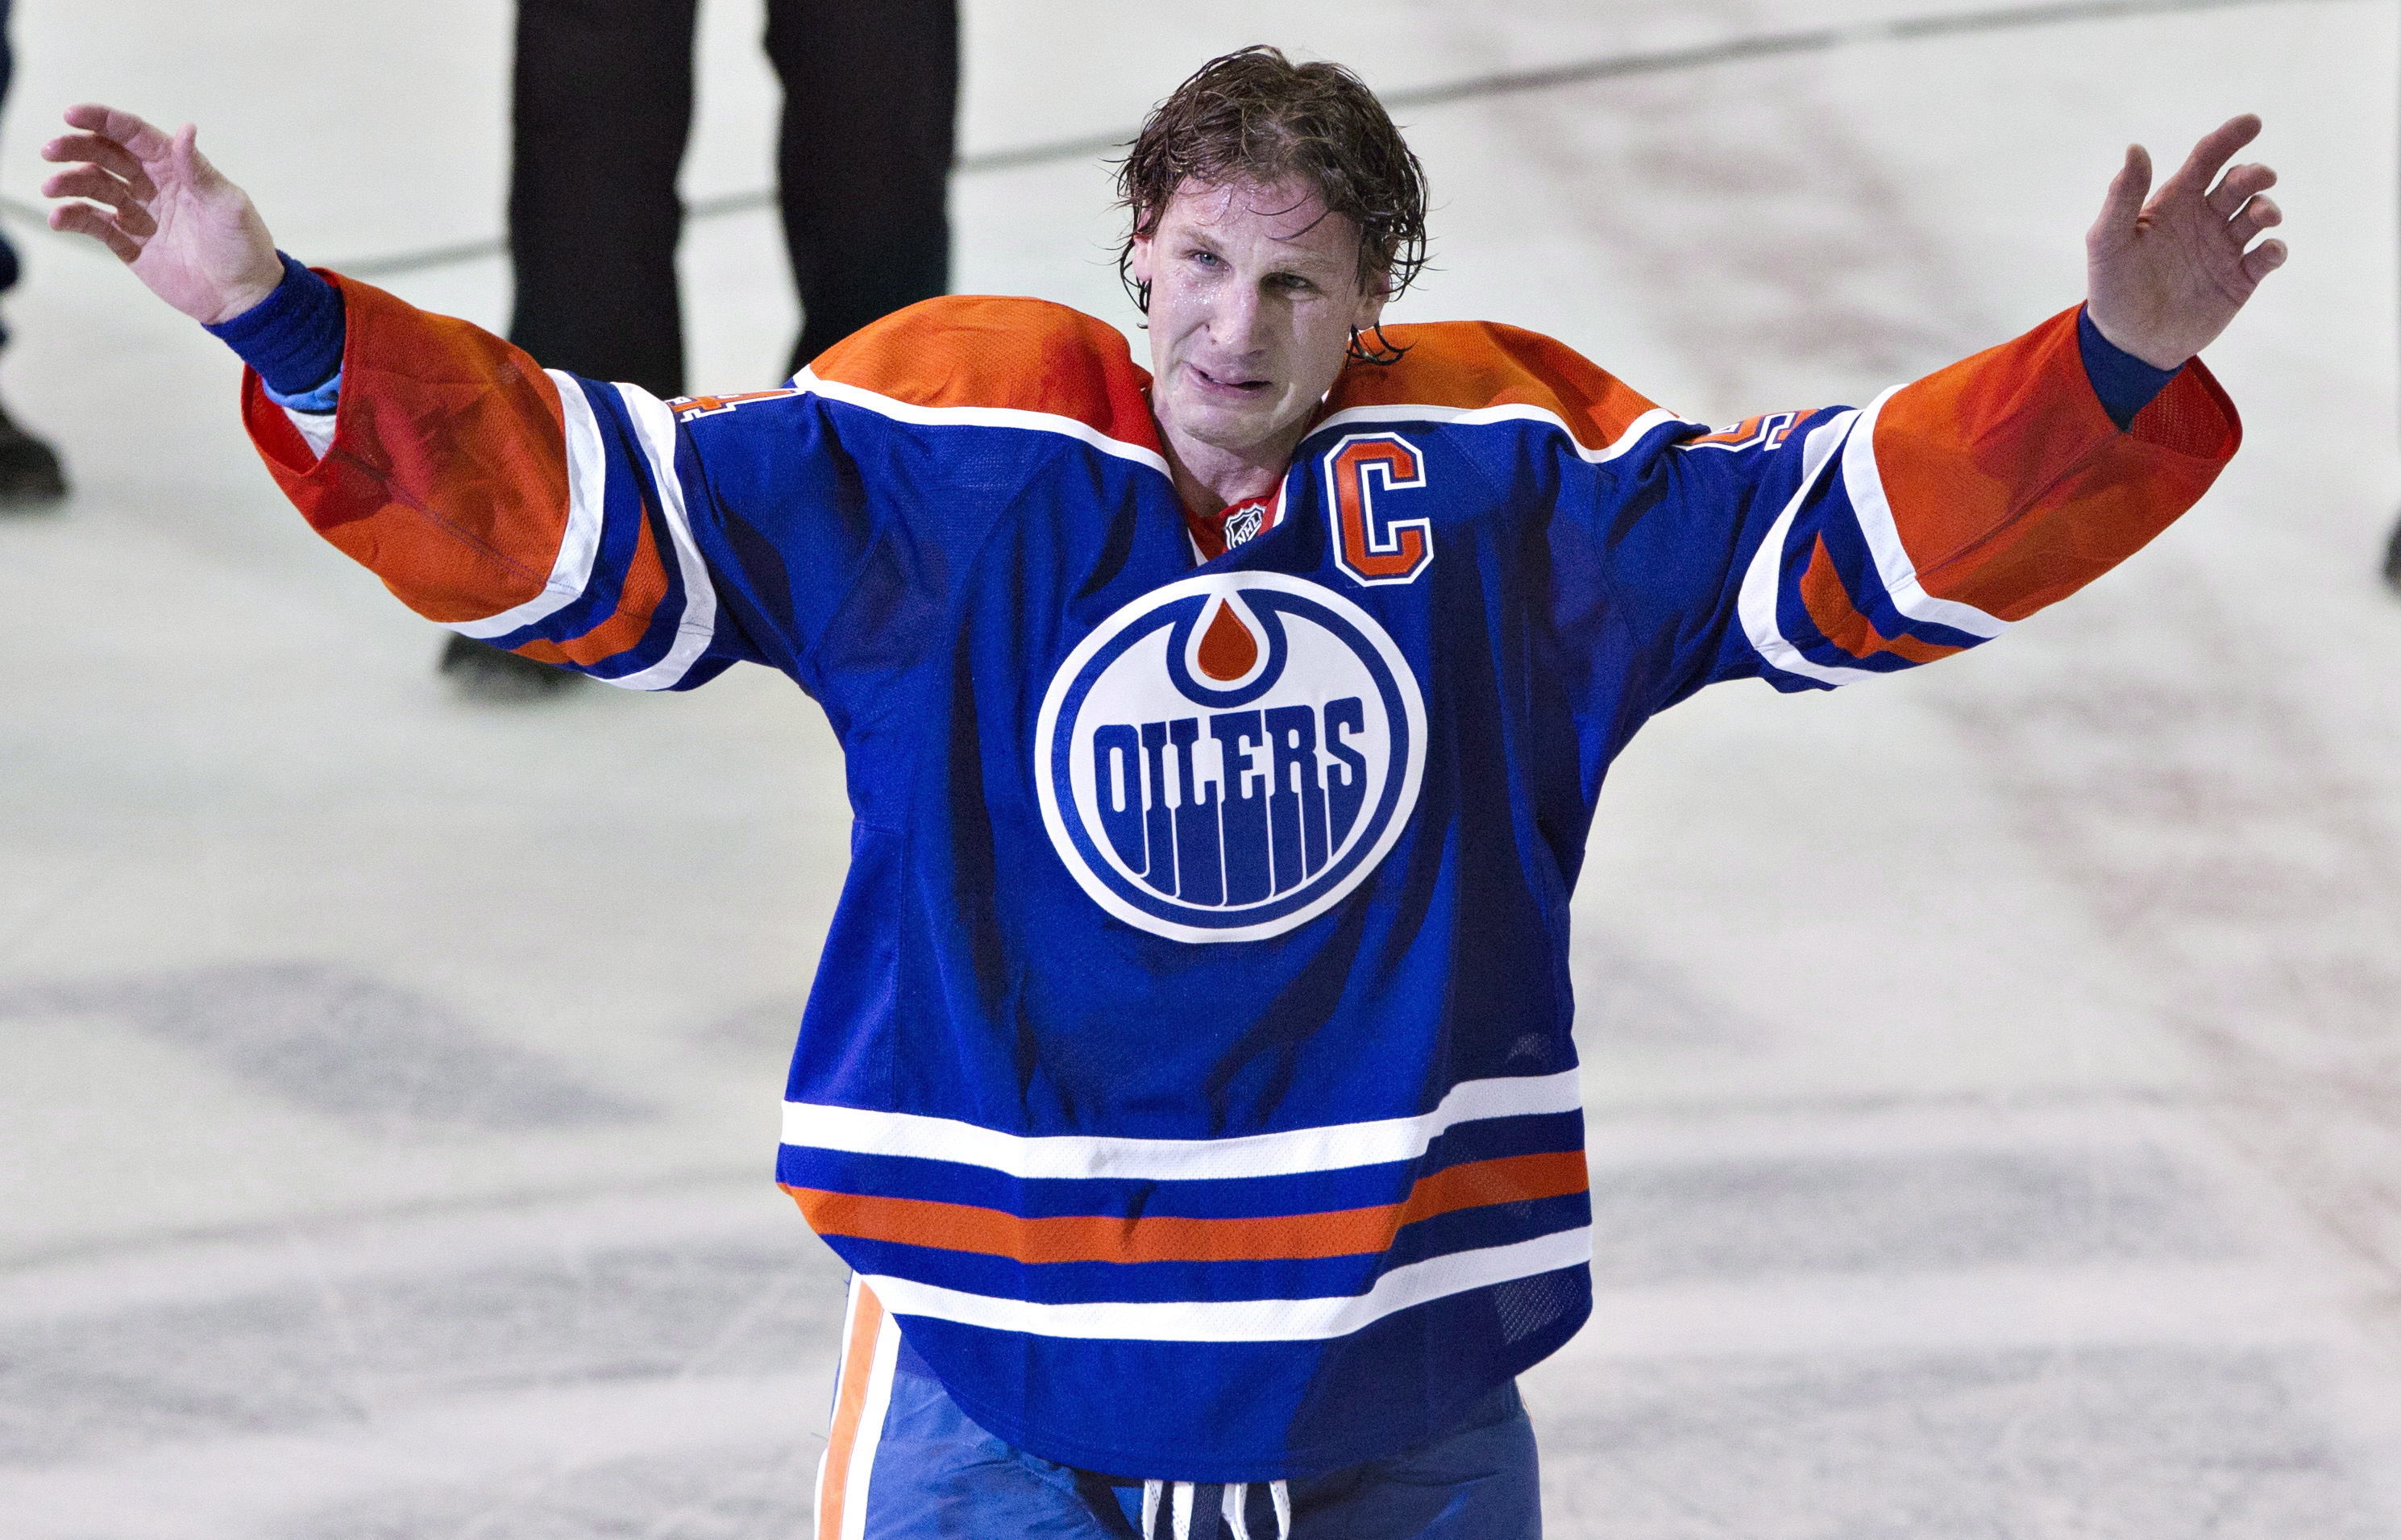 Oilers retire Kevin Lowe's jersey, raise his No. 4 to rafters